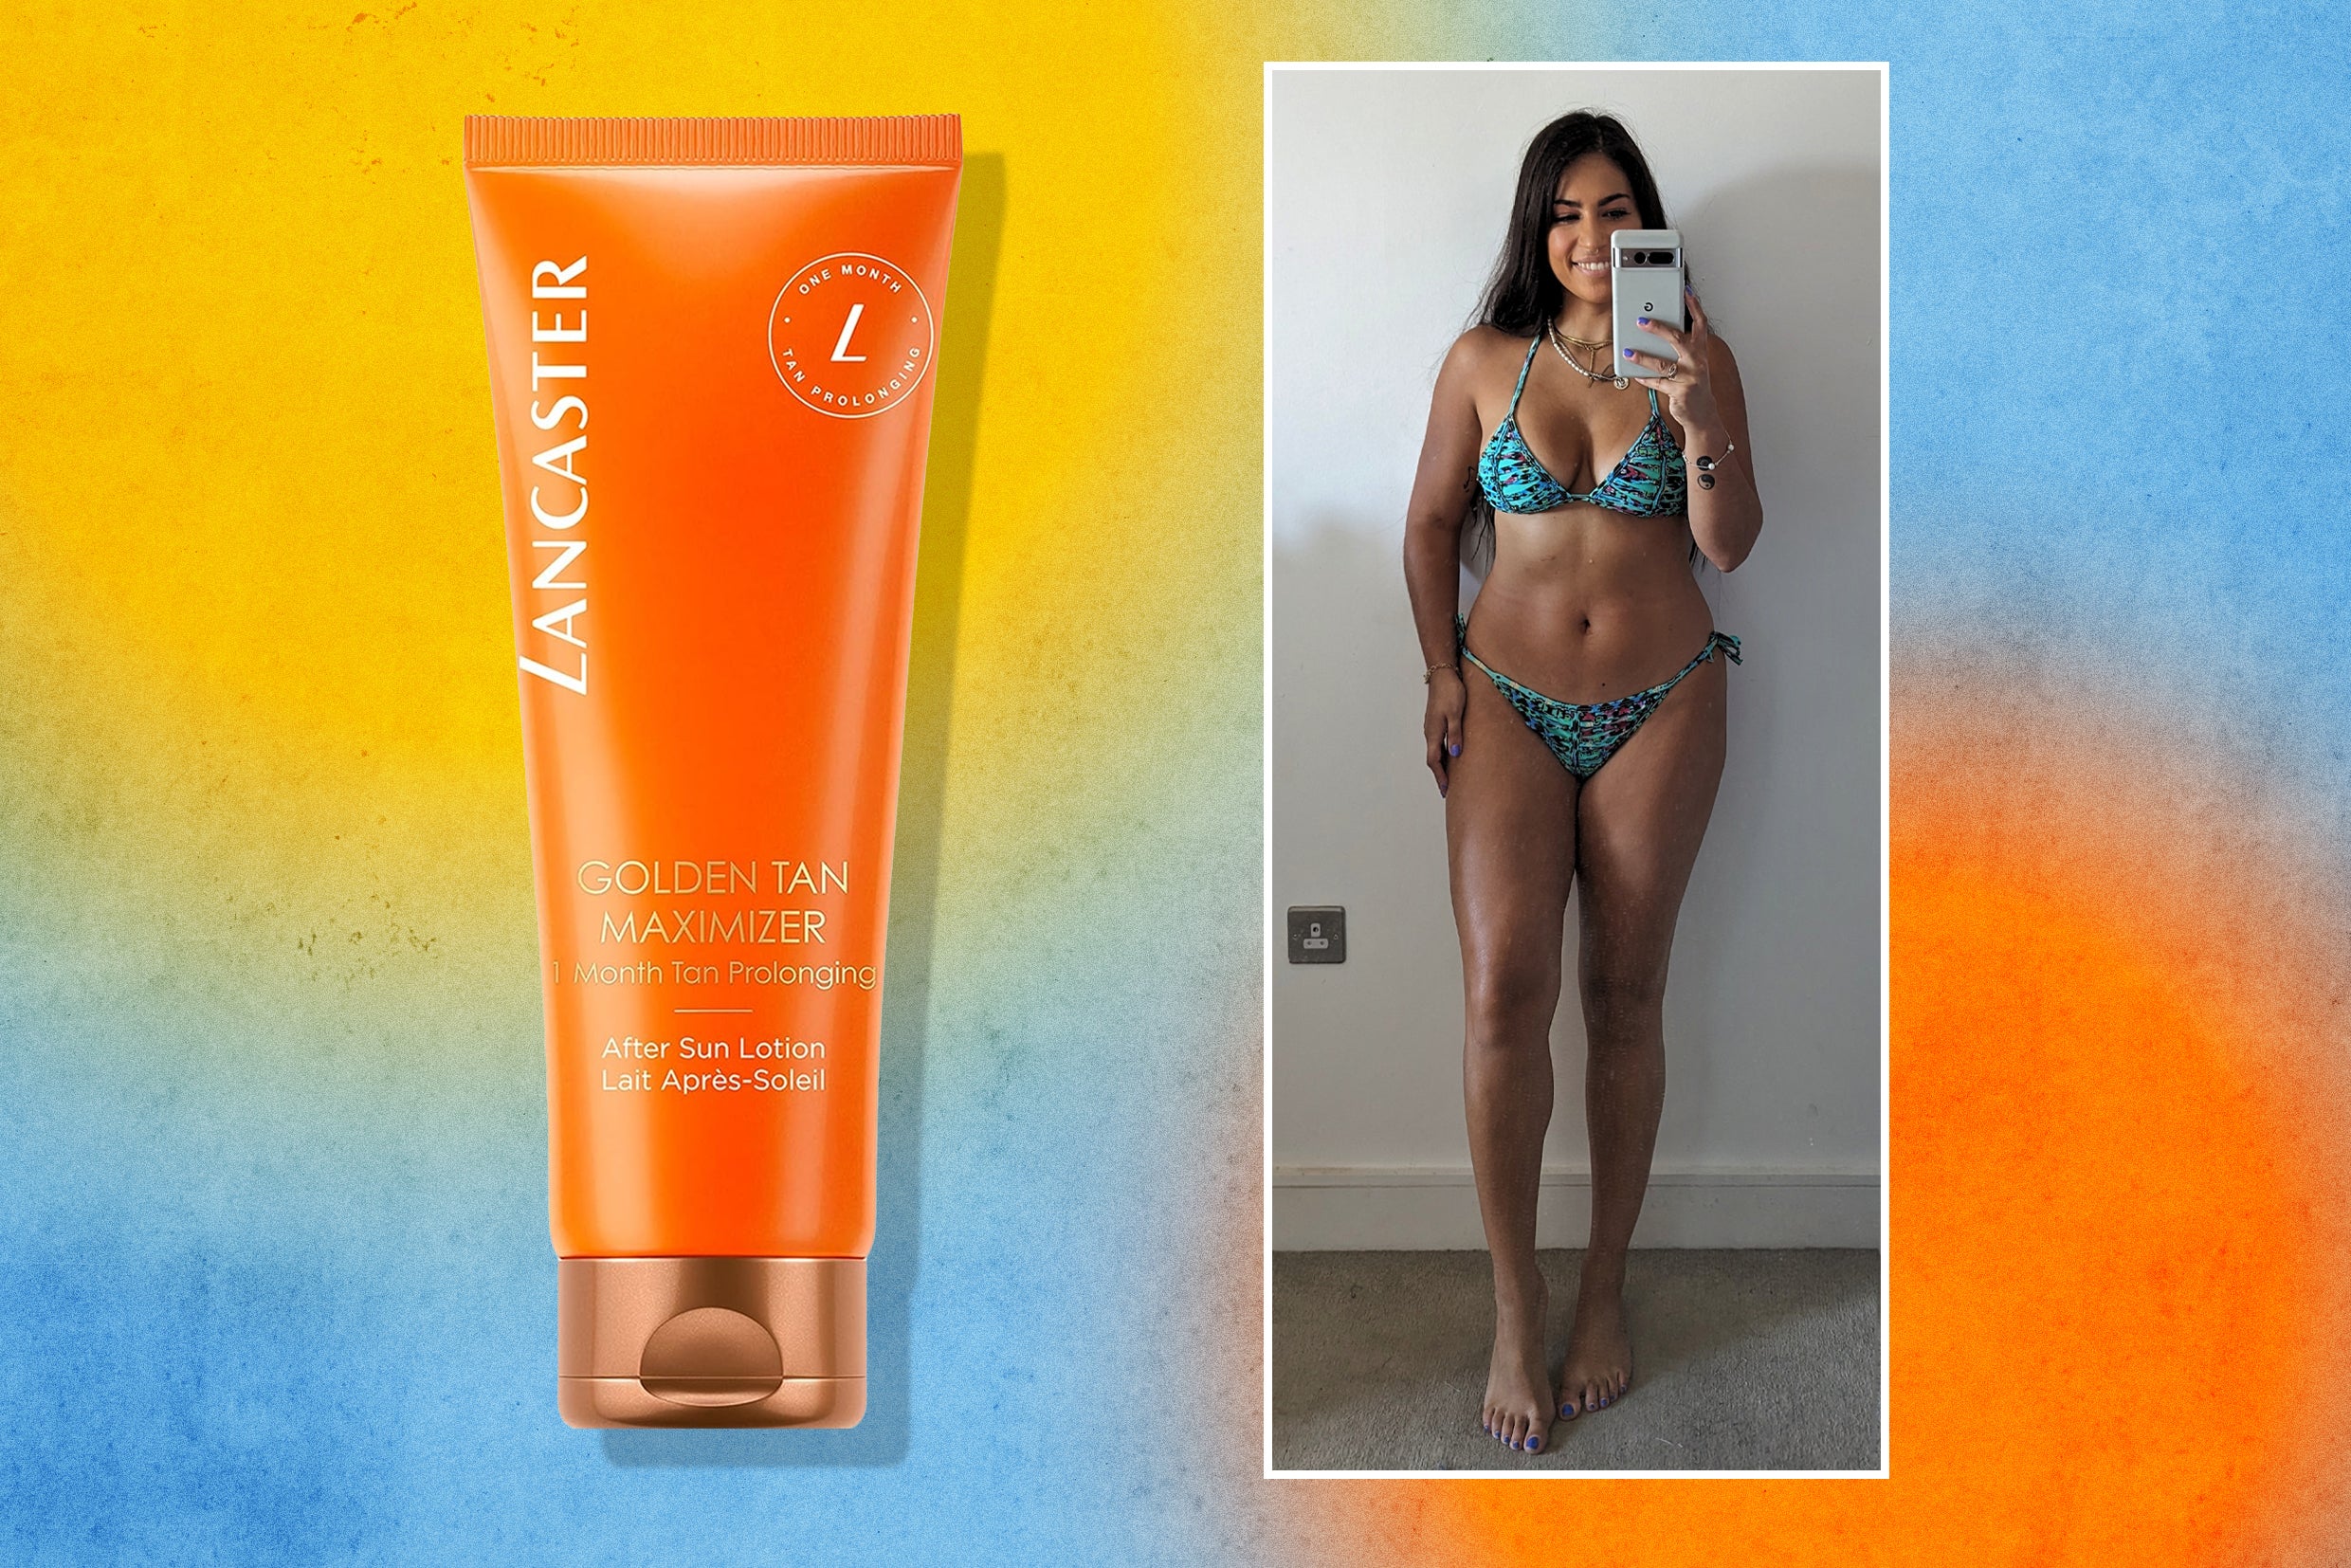 We put this tan-prolonging product to the test